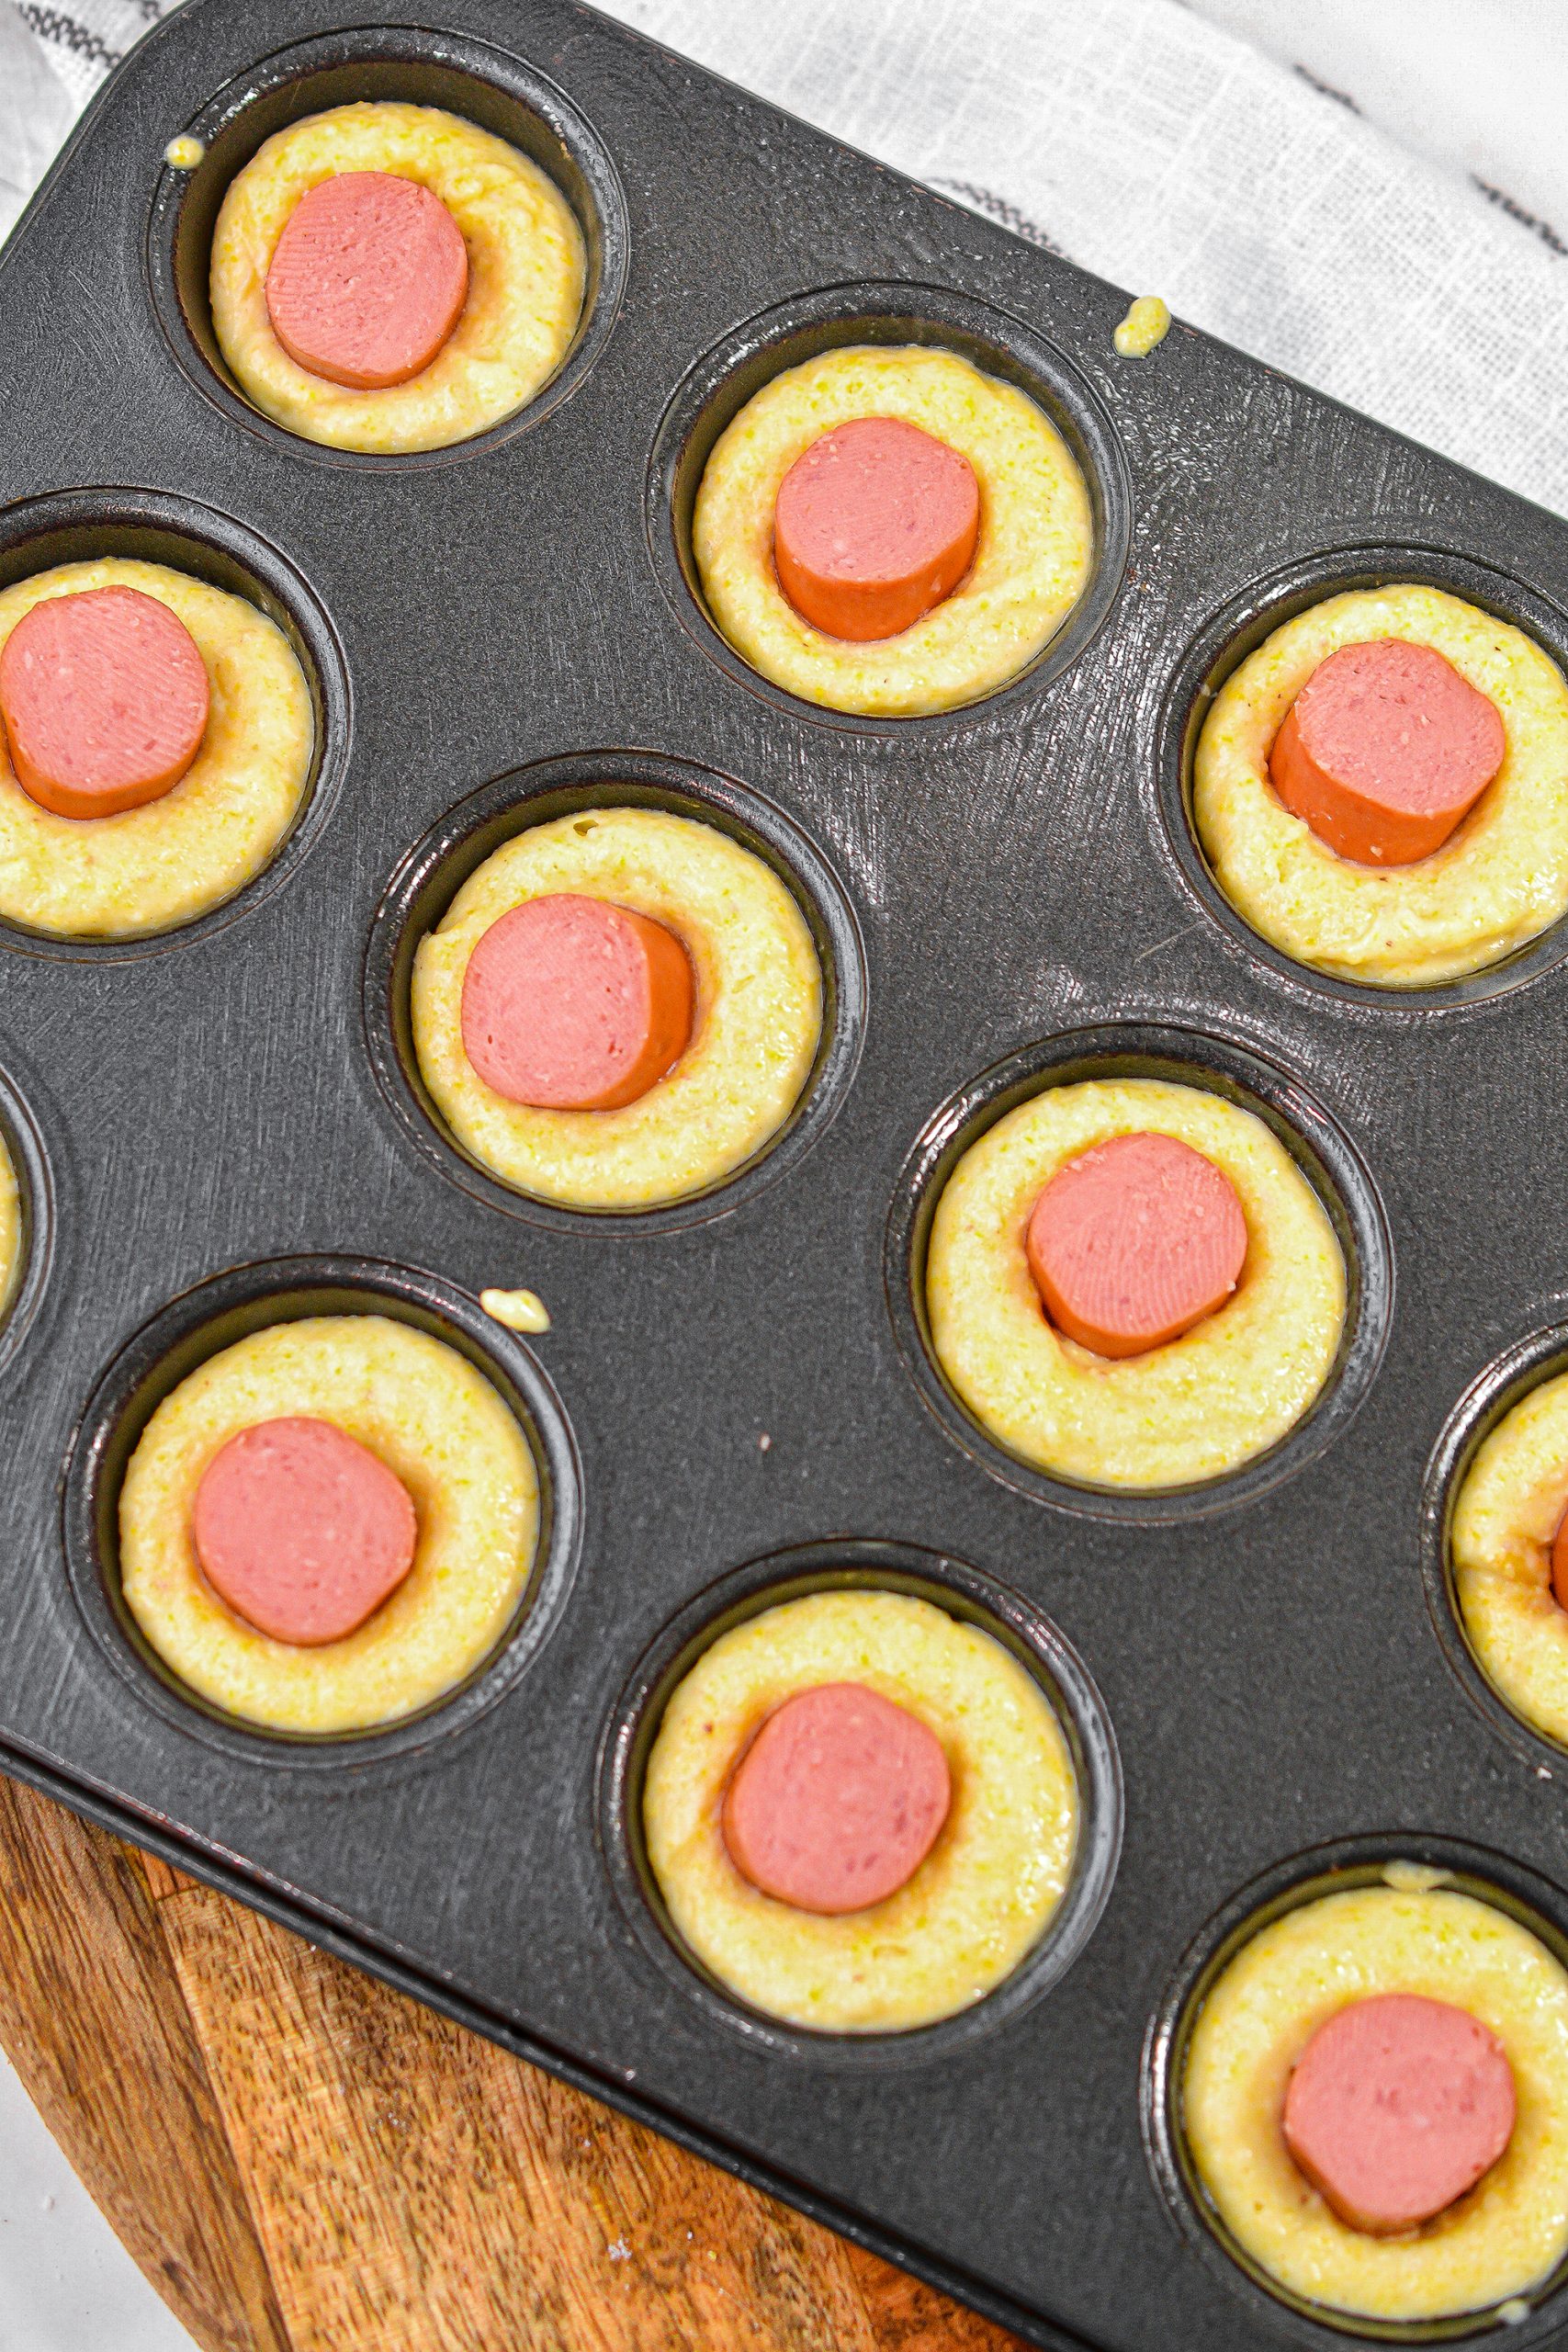 Place a piece of hot dog into the center of each filled section of the mini muffin tin.